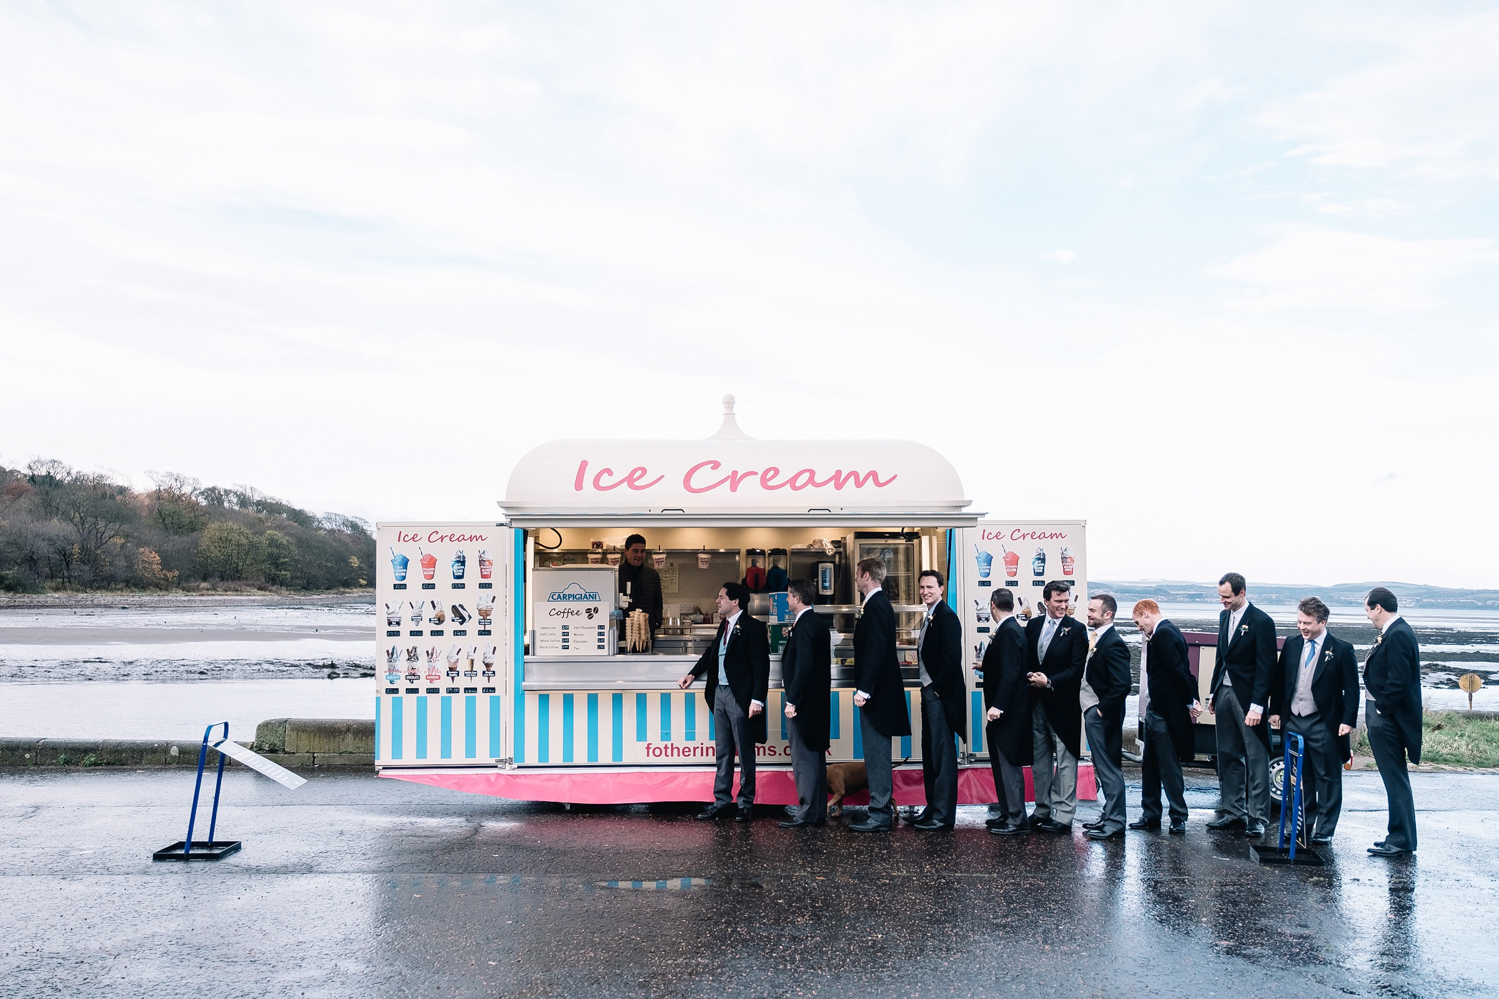  groomsmen all wearing morning suits lining up for ice cream 